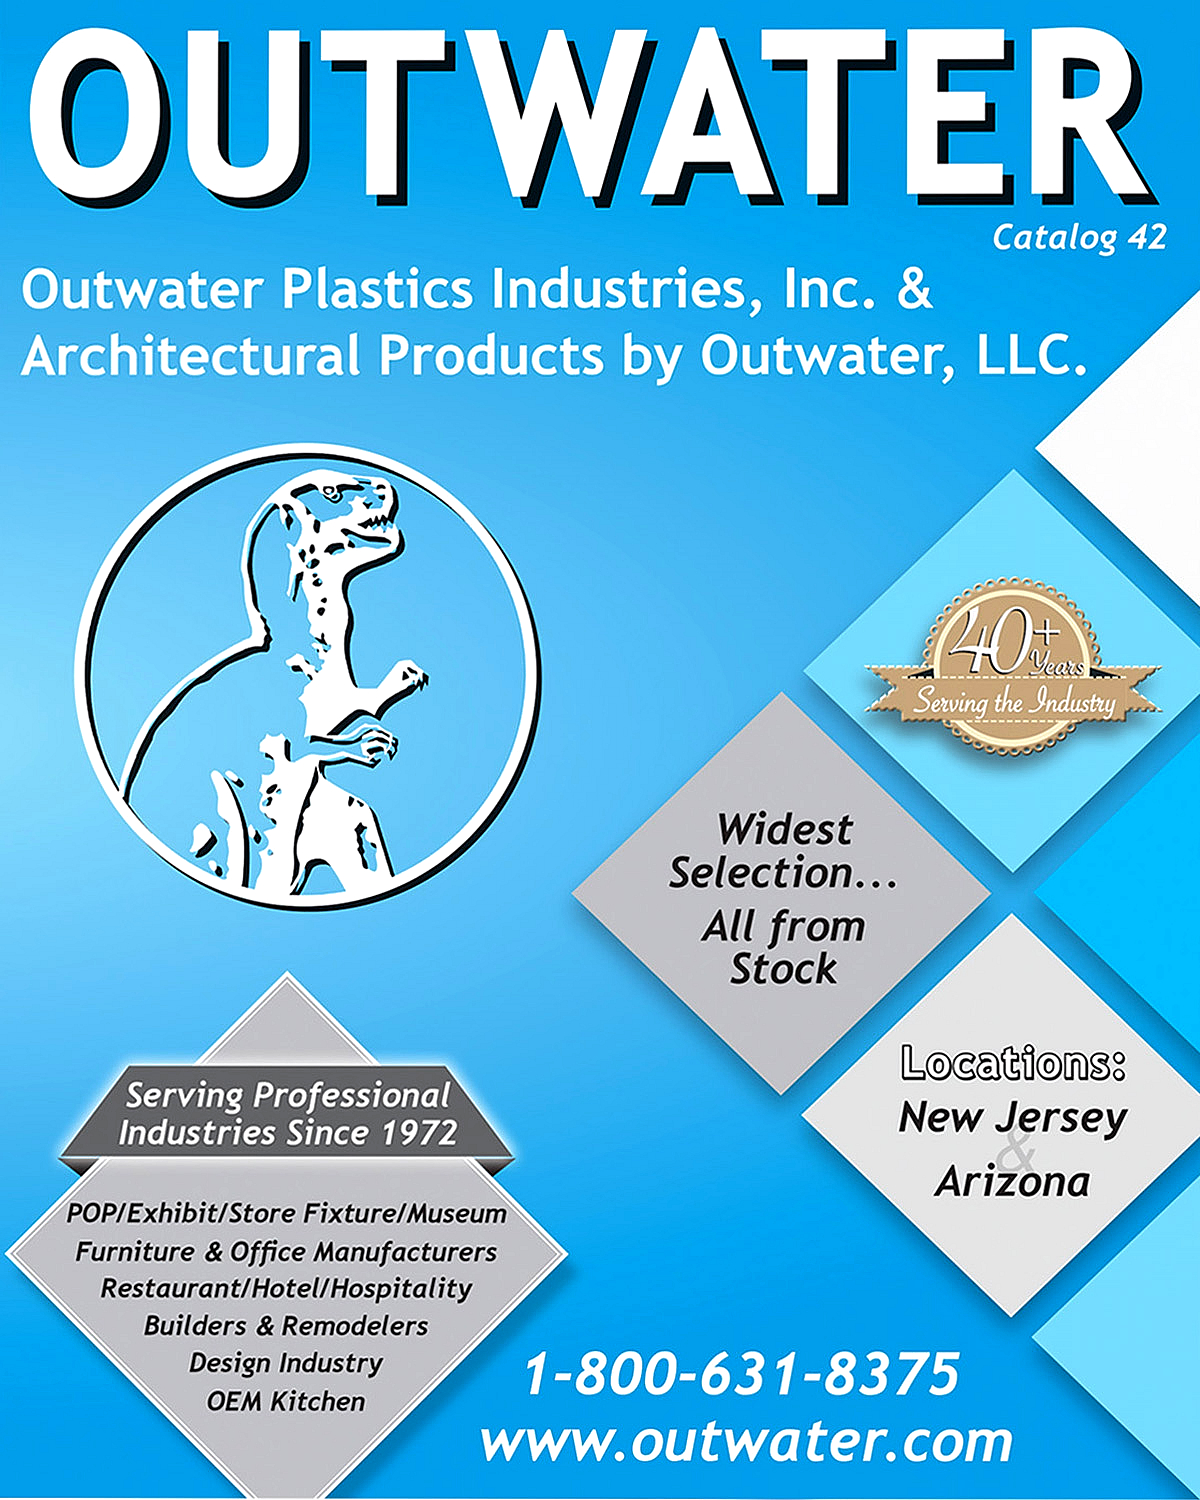 Outwater offers more than 65,000 standard and innovative products